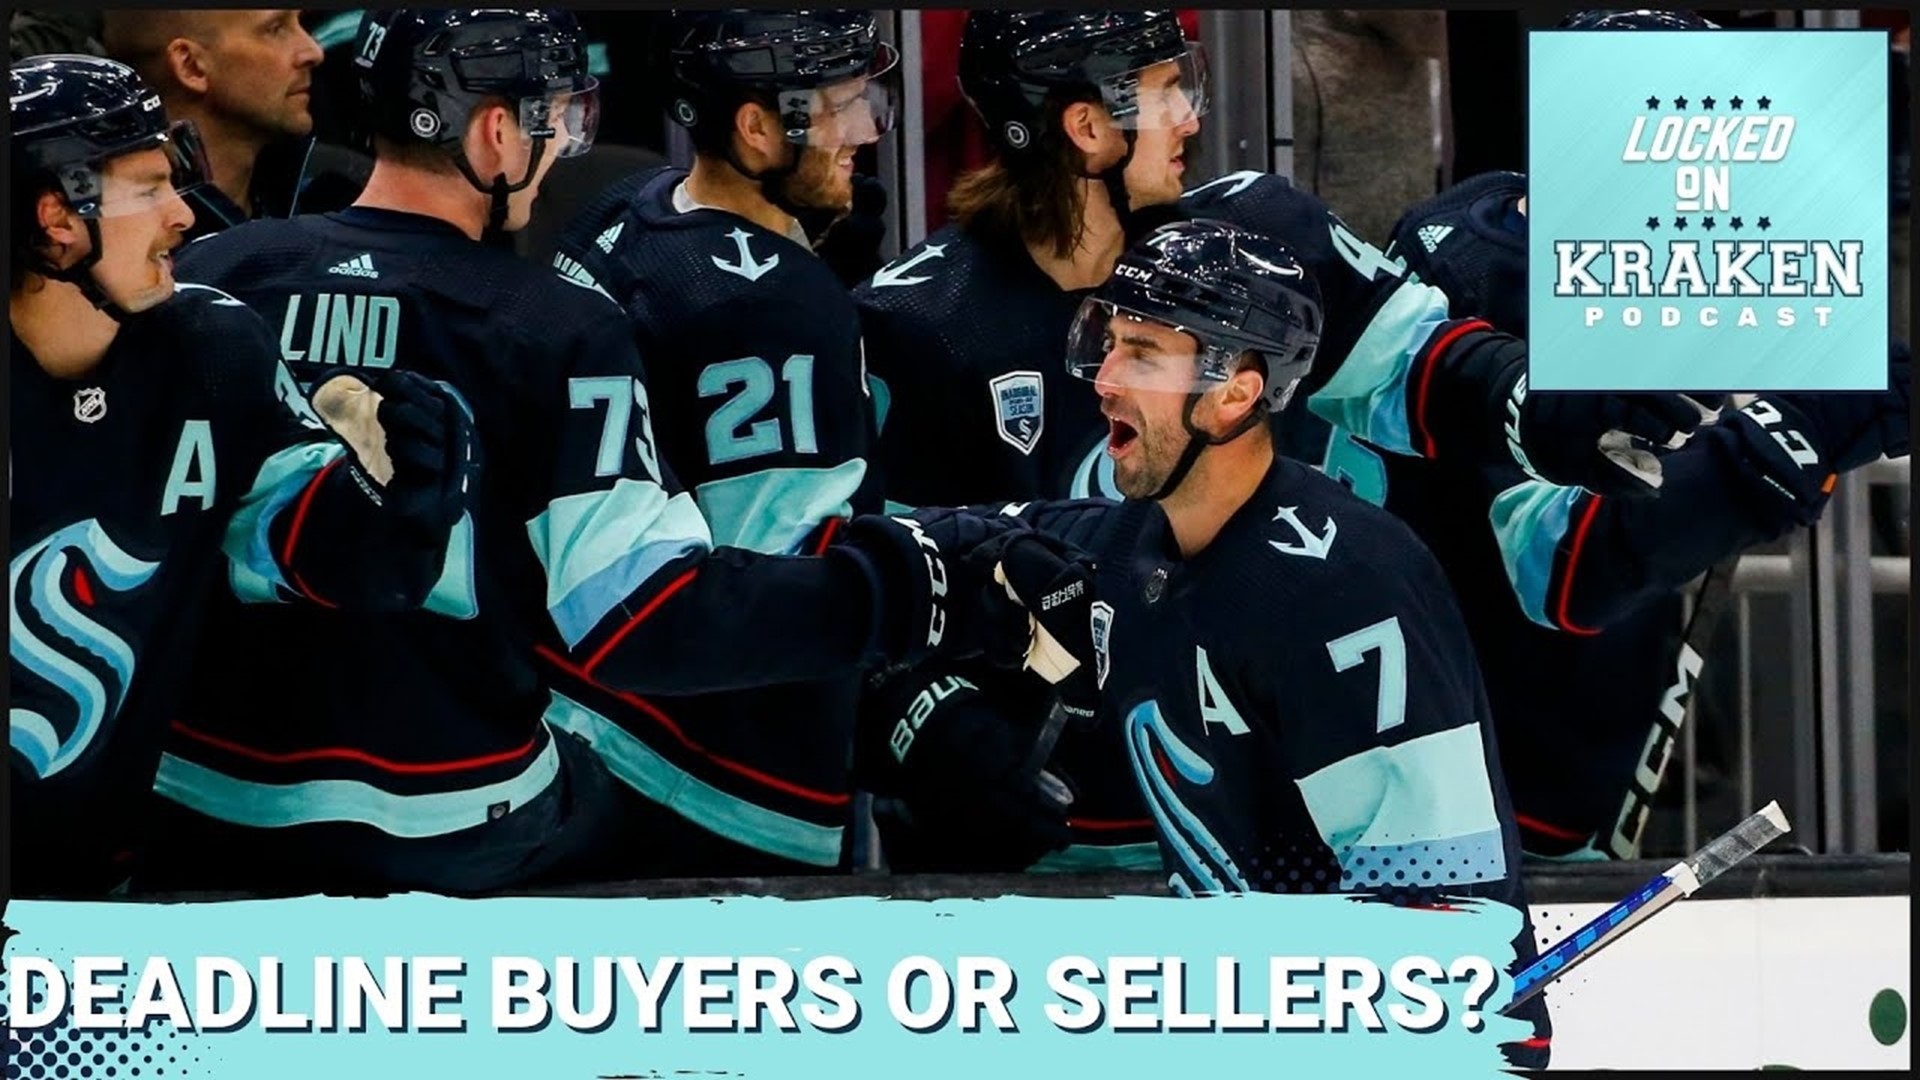 The NHL trade deadline is coming up on March 8th. Will the Seattle Kraken be buyers or sellers?